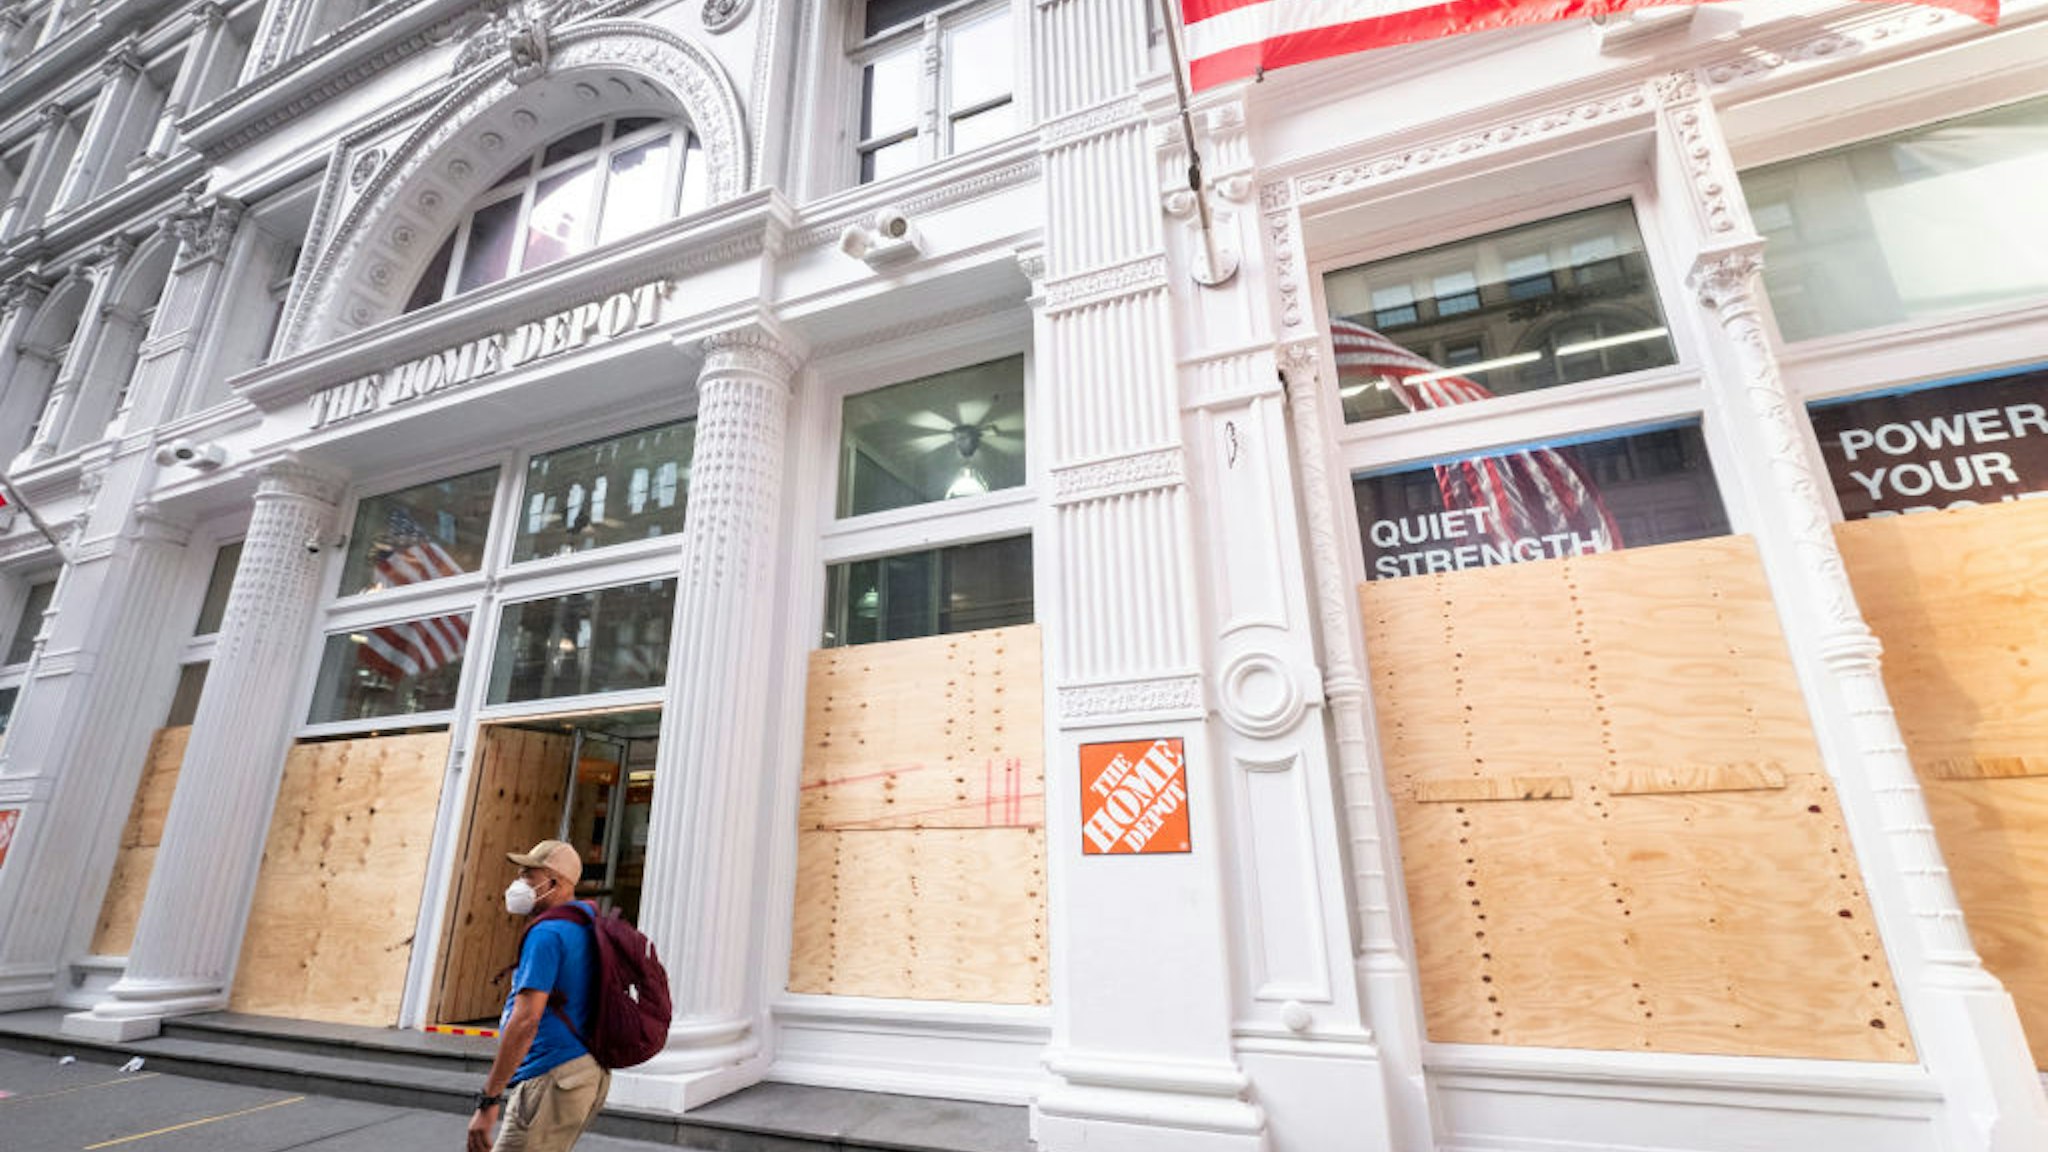 A man wearing a mask walks past a Home Depot on 5th Avenue Manhattan that is open for business but has all of their windows boarded up to prevent anyone from vandalizing or looting the store.